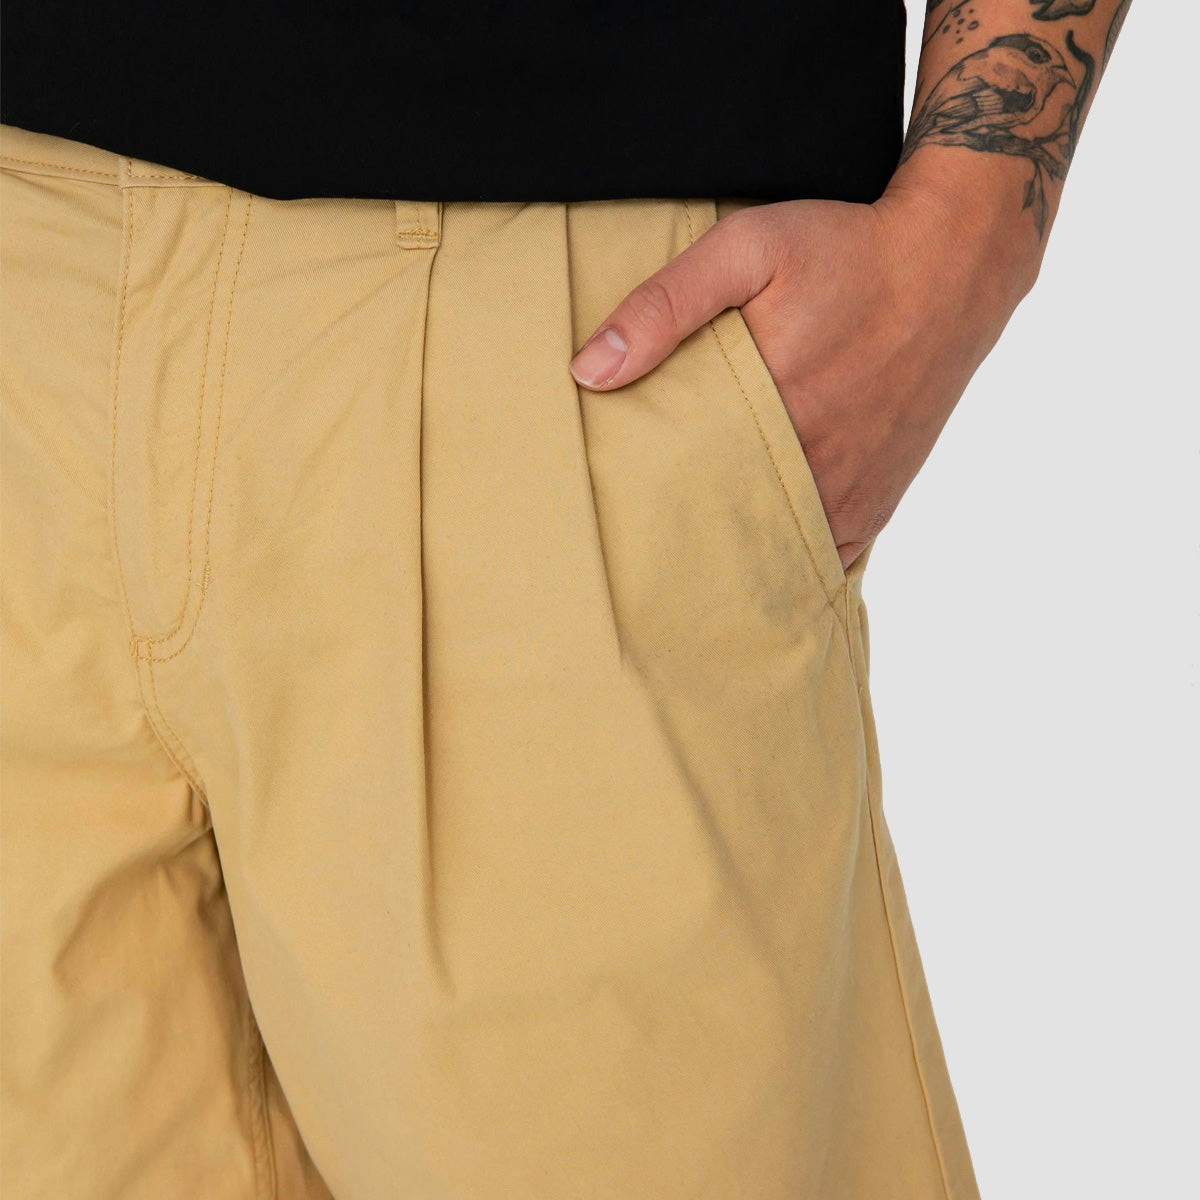 Vans Authentic Chino Pleated Loose Shorts Taos Taupe